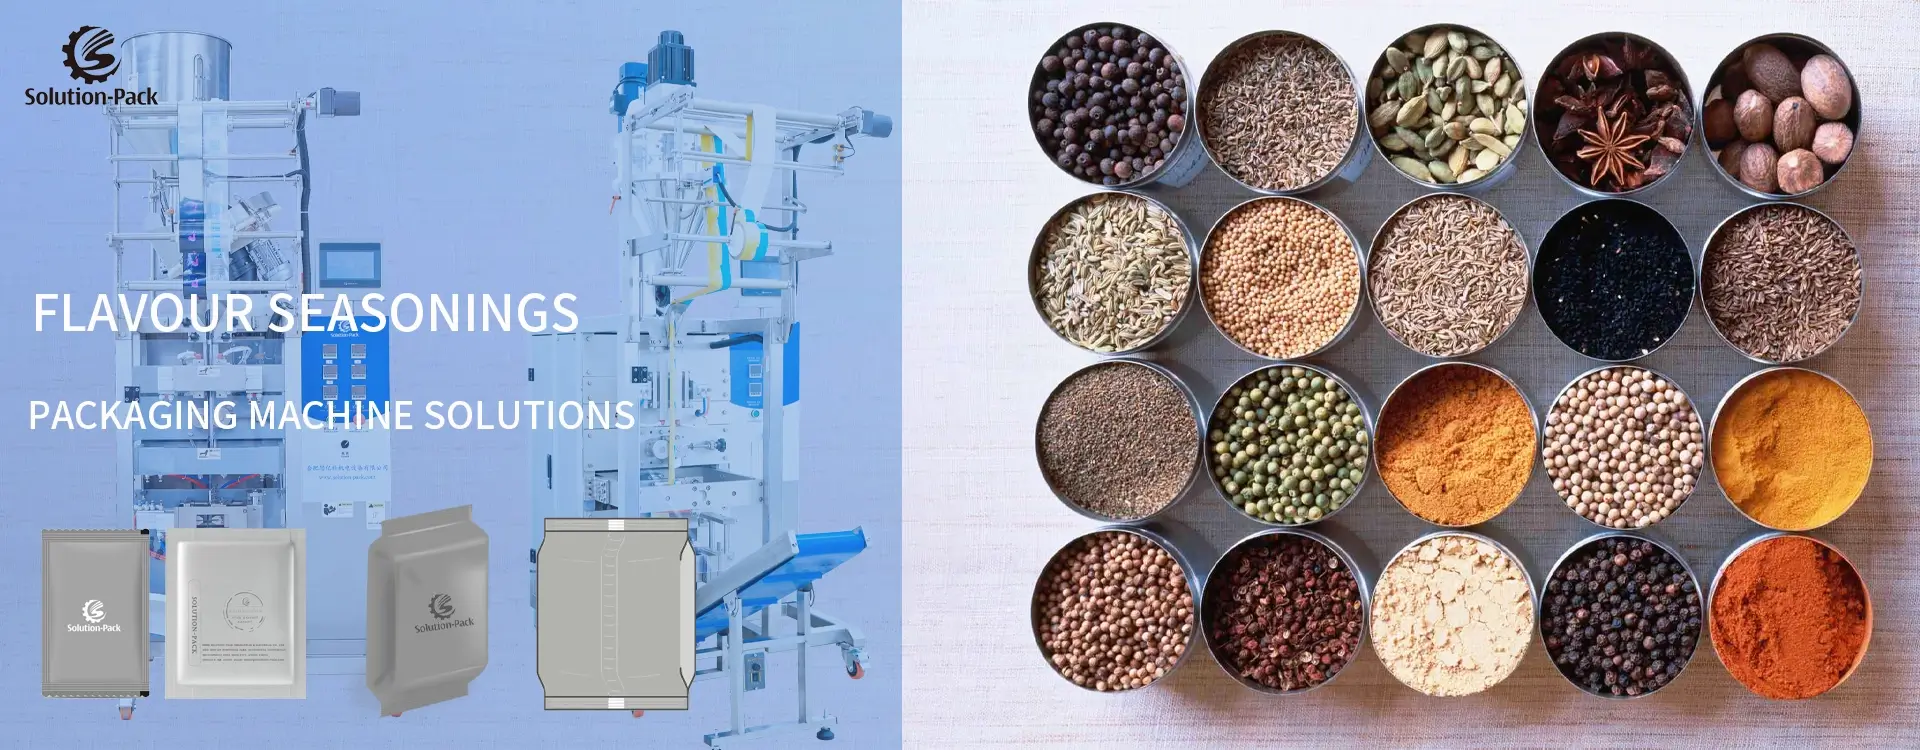 (Solution-Pack) Flavour Spices Automatic Packaging Machine Solutions Heading Banner Picture